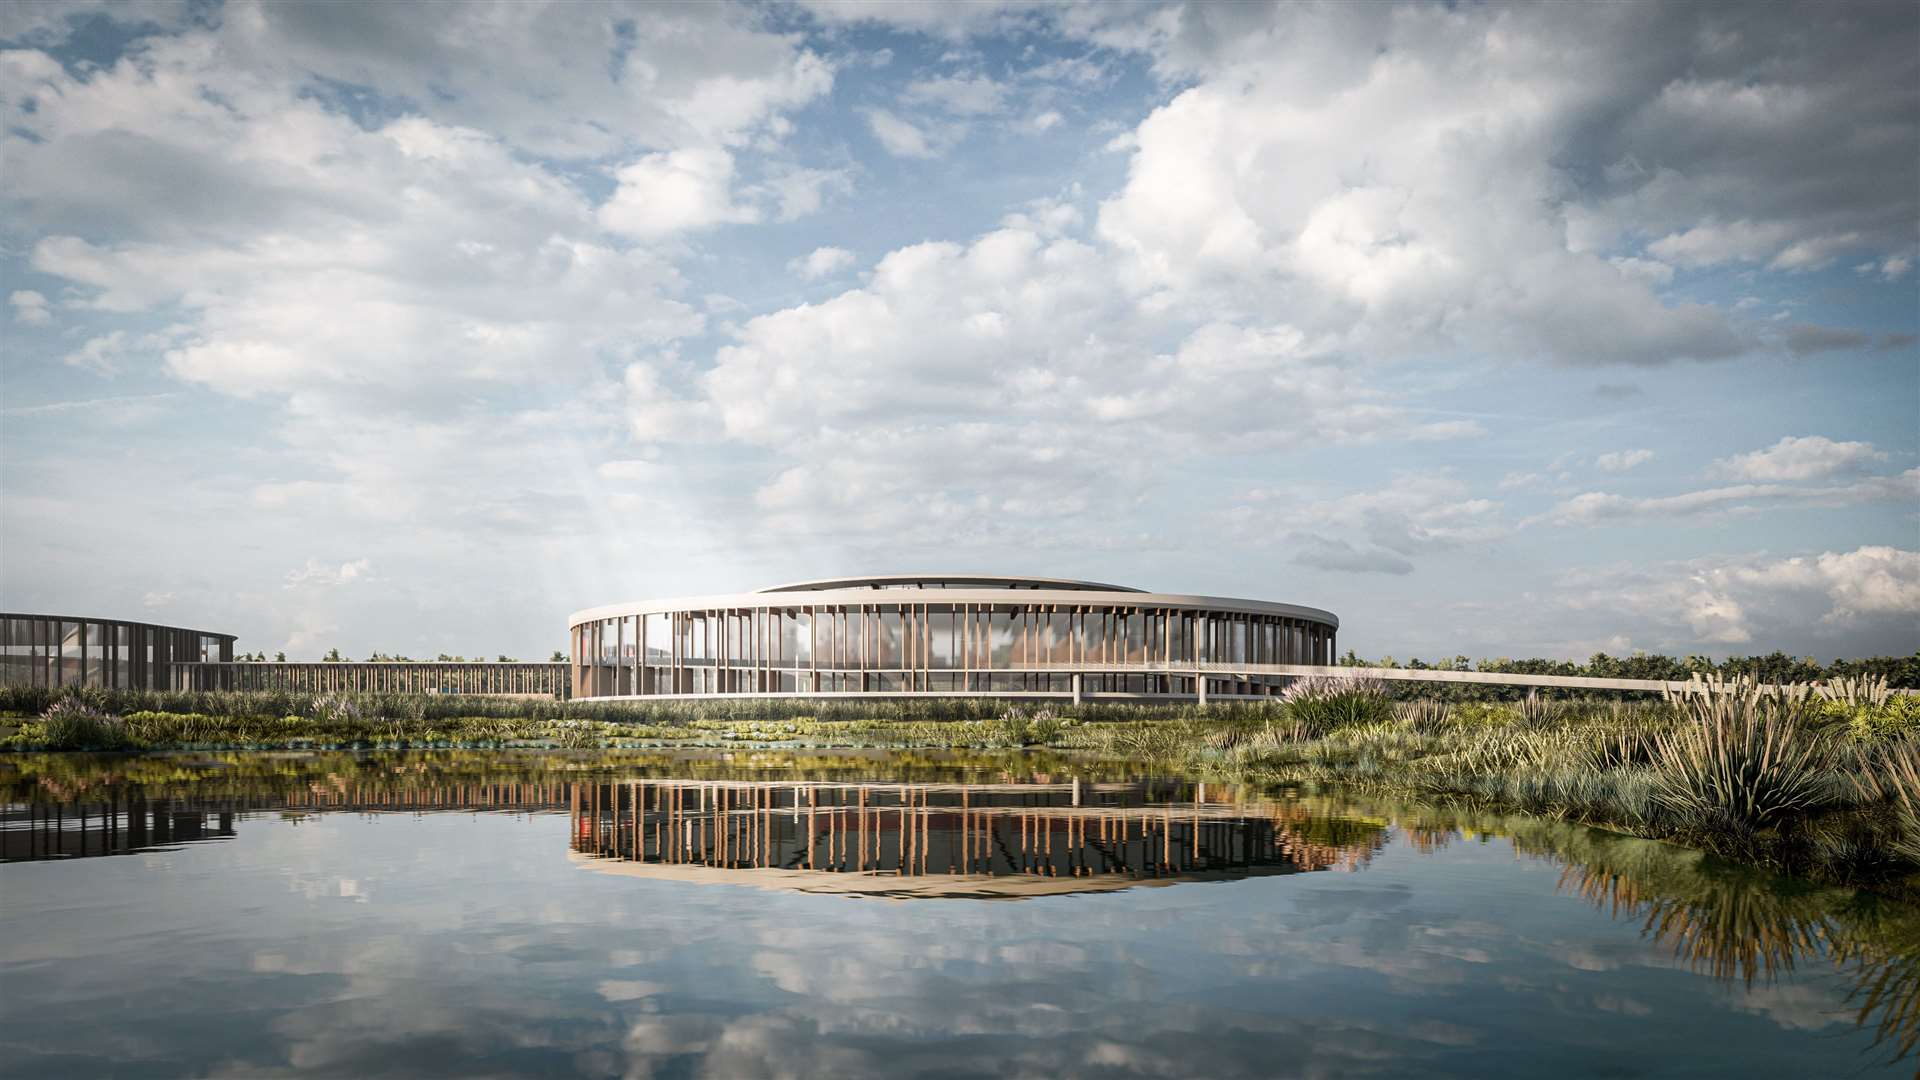 Artist's impressions show the factory would be built on stilts. Picture: Hollaway Studios